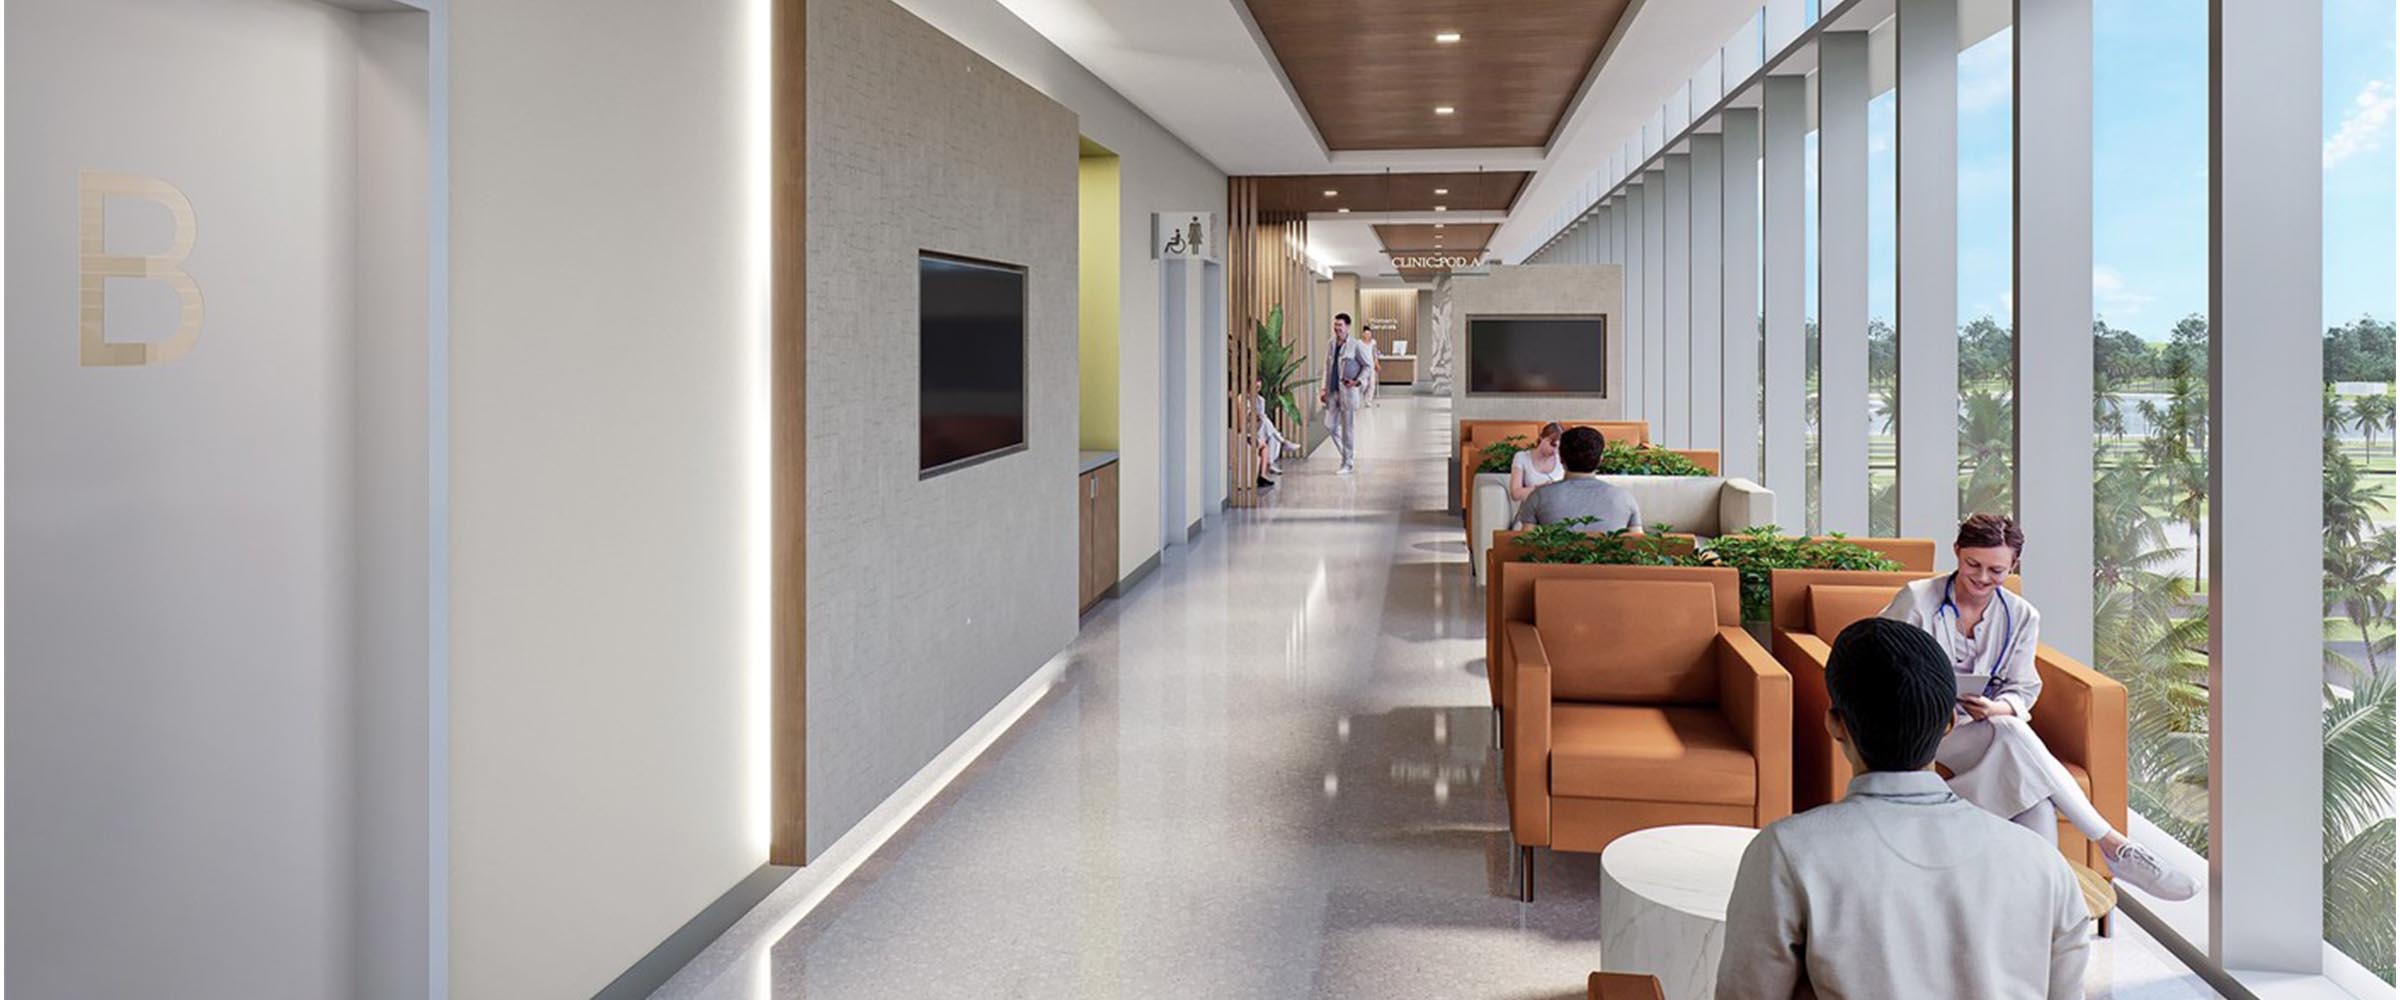 Architectural Rendering of UHealth at Doral in Downtown Doral